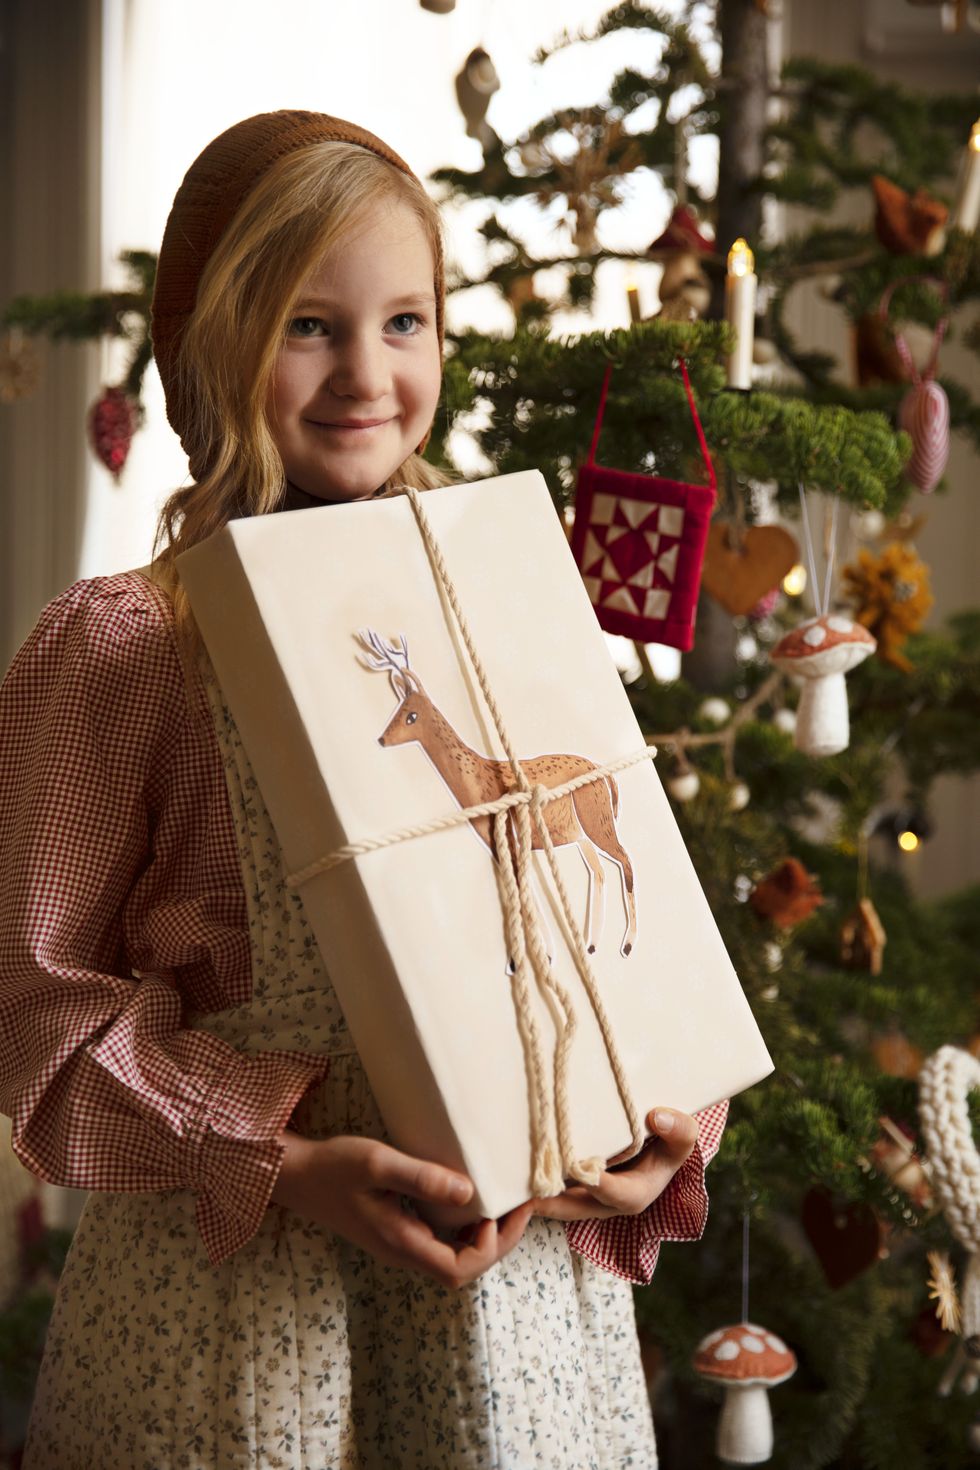 'tis a gift to be simple homeowners merrilee liddiard and jon liddiard merrilee adorns brown paper packages with illustrations like this reindeer christmas craft, holiday decor